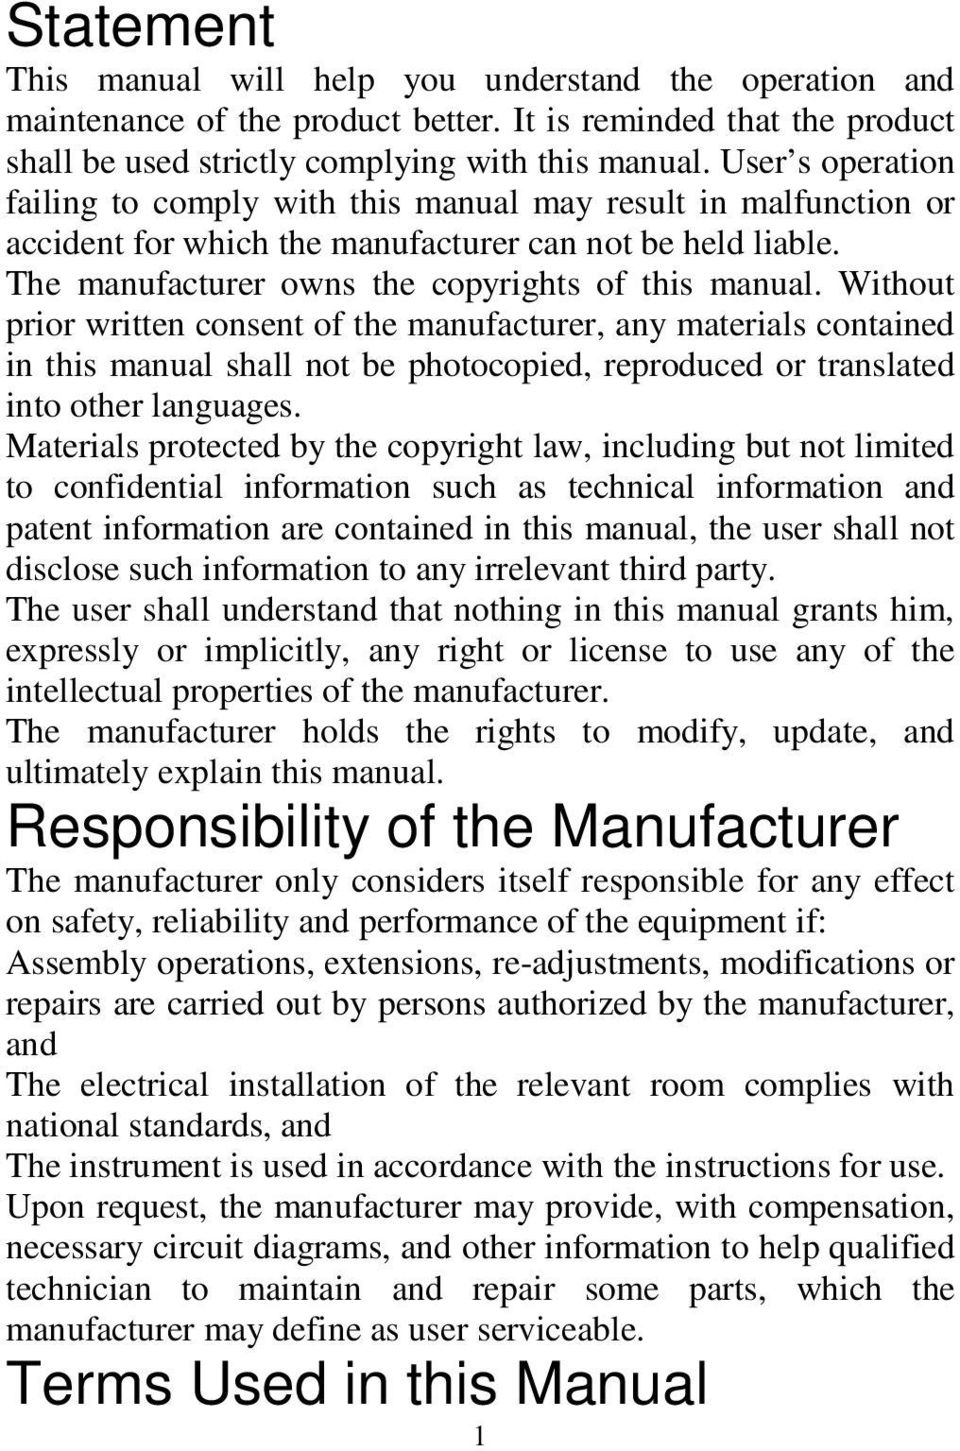 Without prior written consent of the manufacturer, any materials contained in this manual shall not be photocopied, reproduced or translated into other languages.